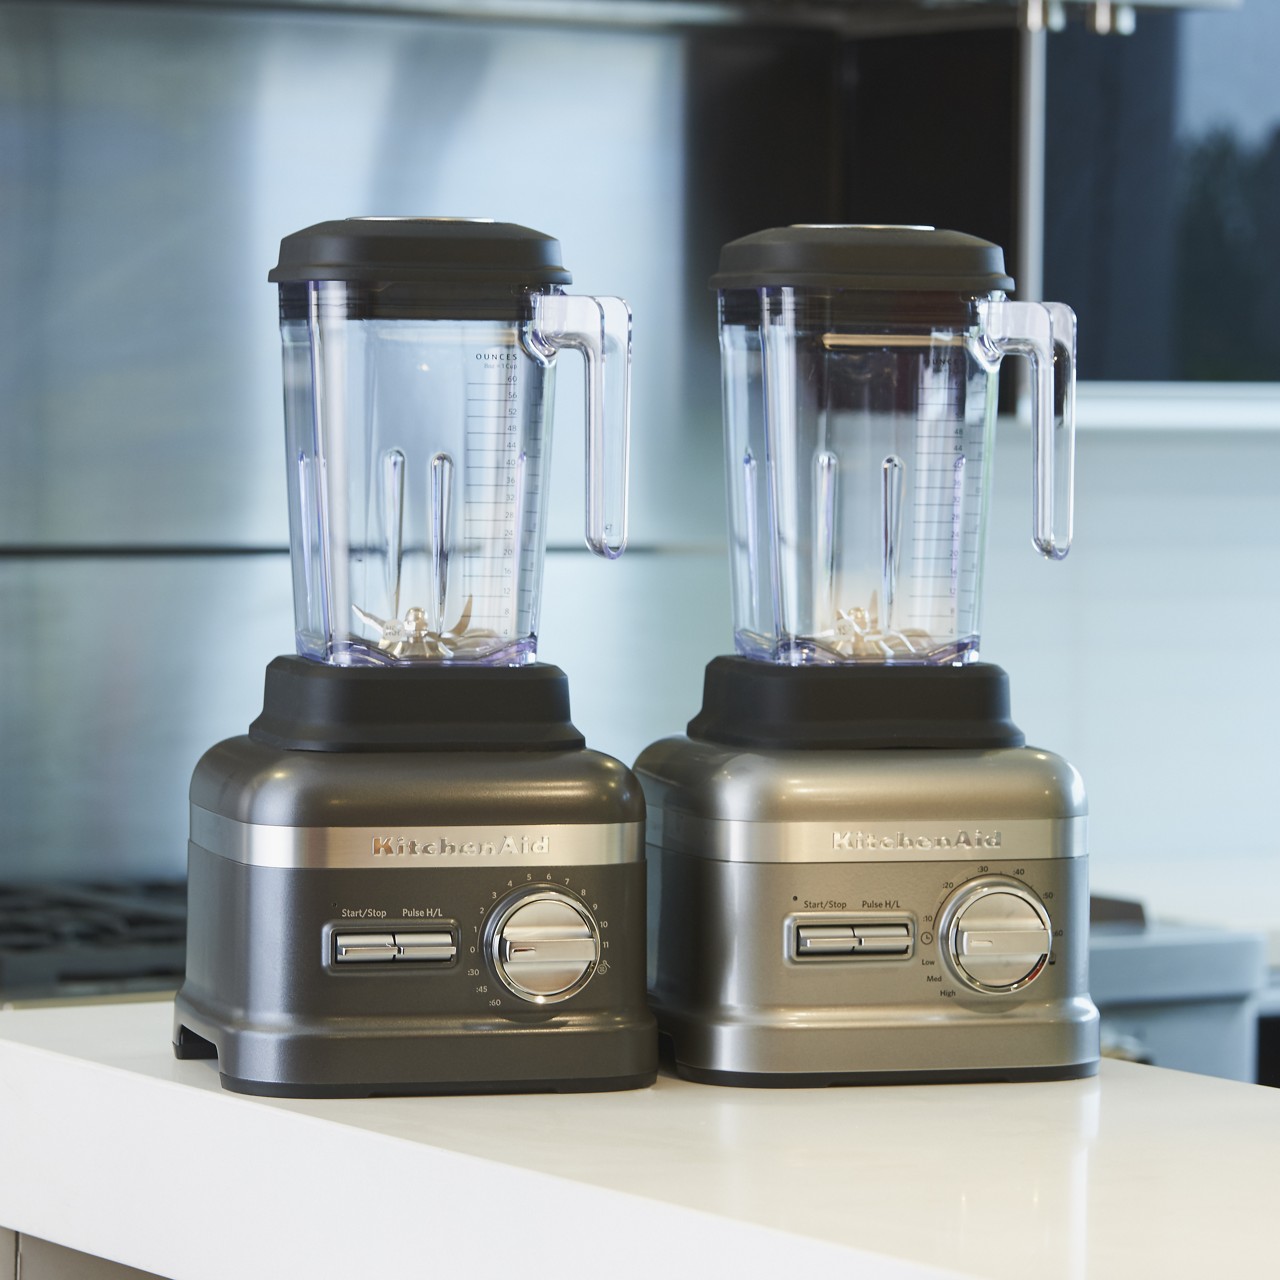 Our commercial blenders are built to withstand rough-and-tumble bar conditions